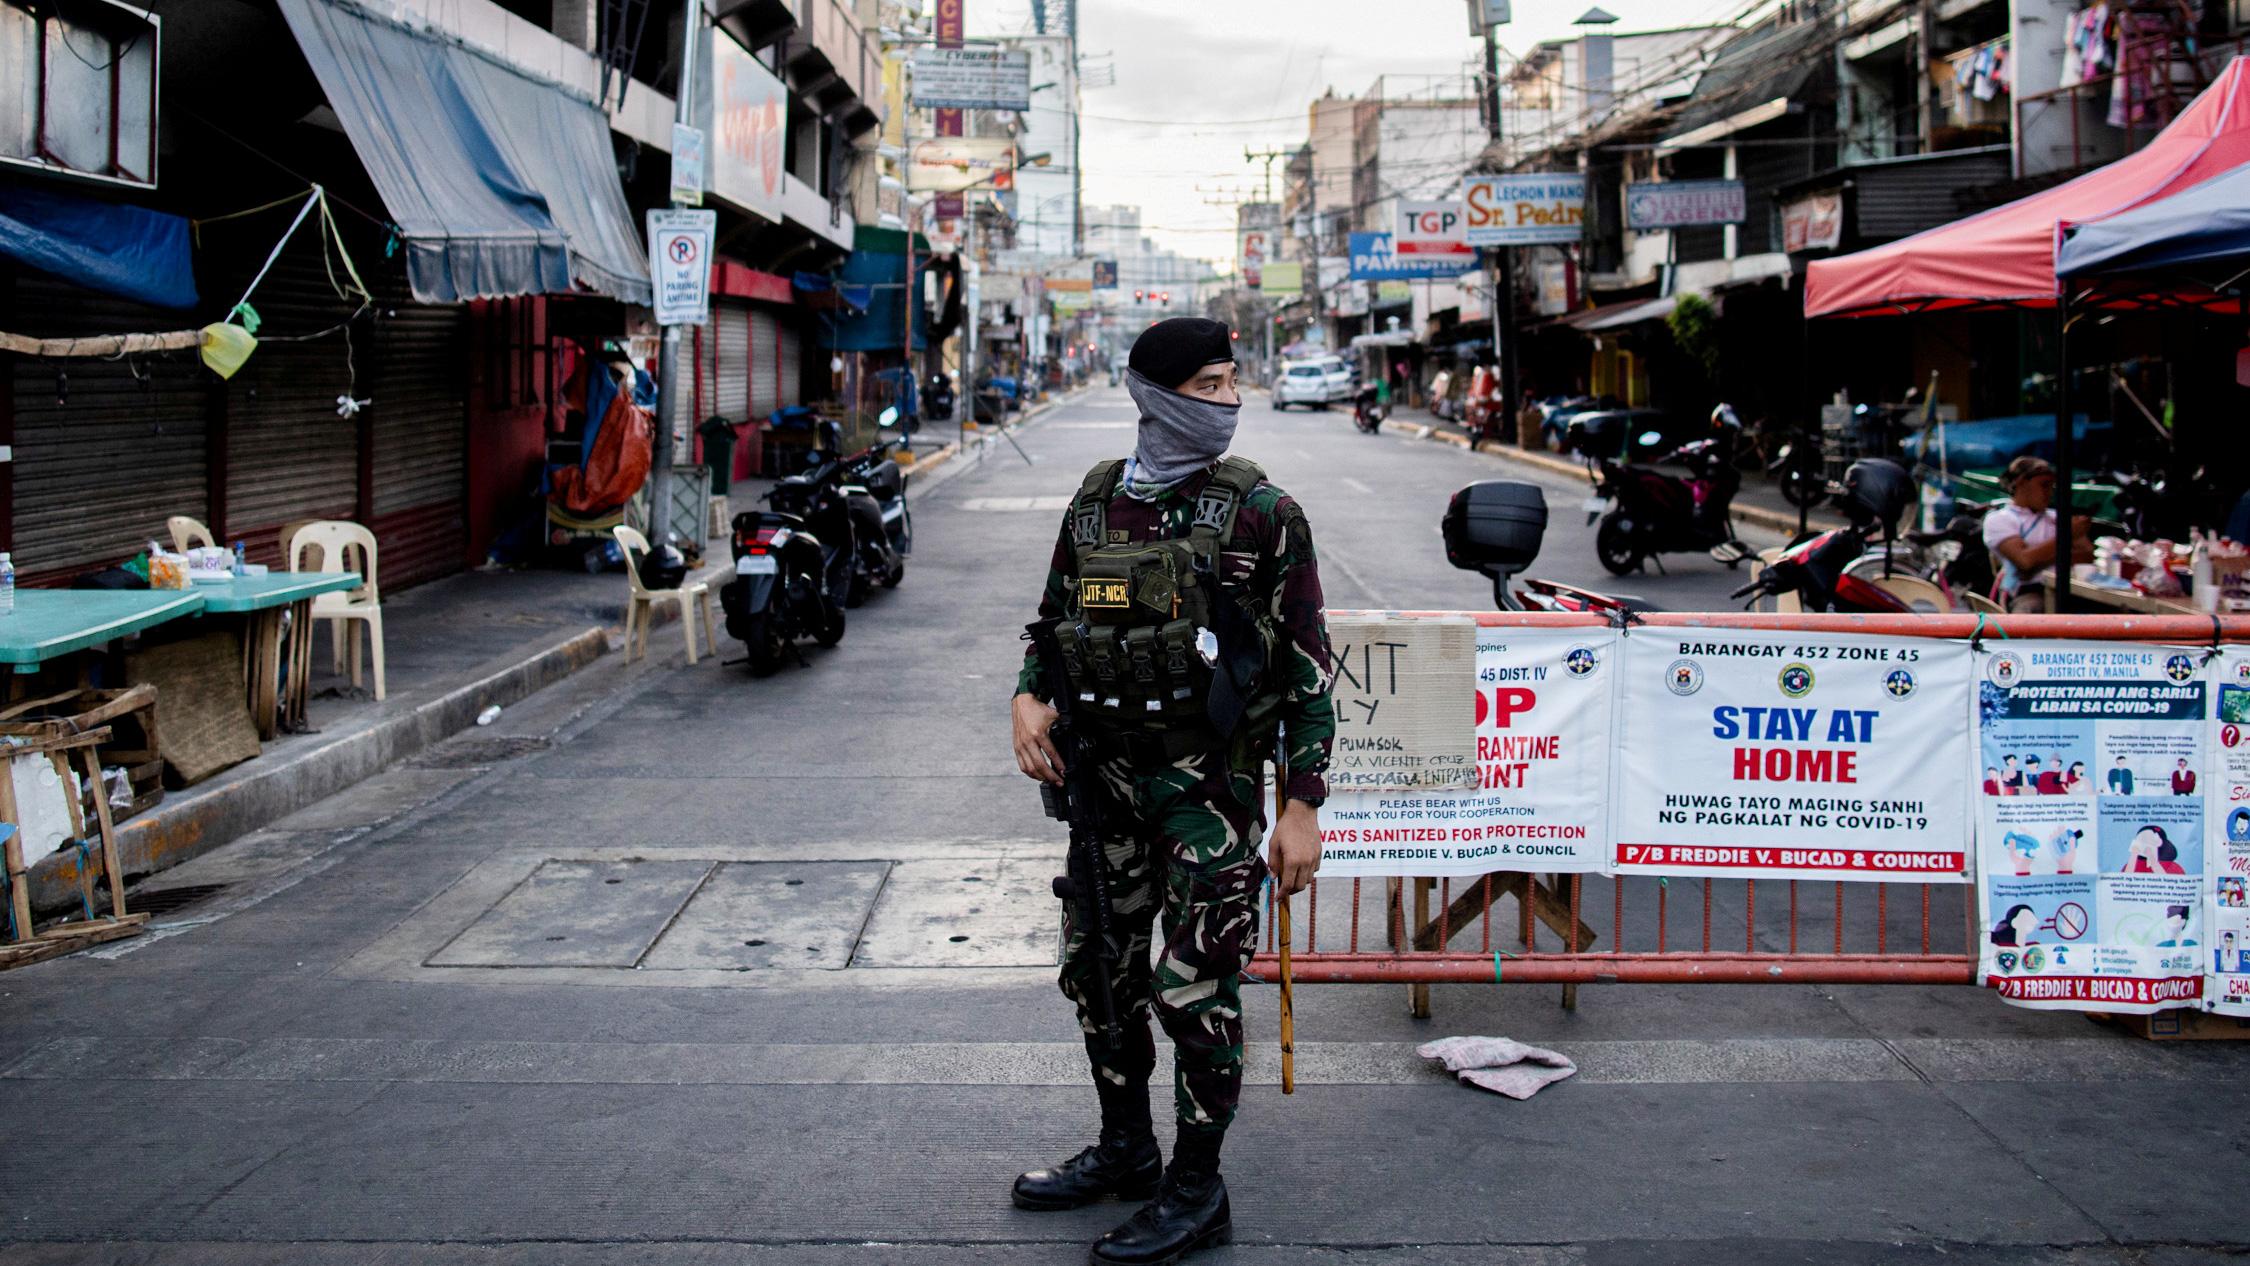  The photo shows a soldier on an empty street in a busy district. 